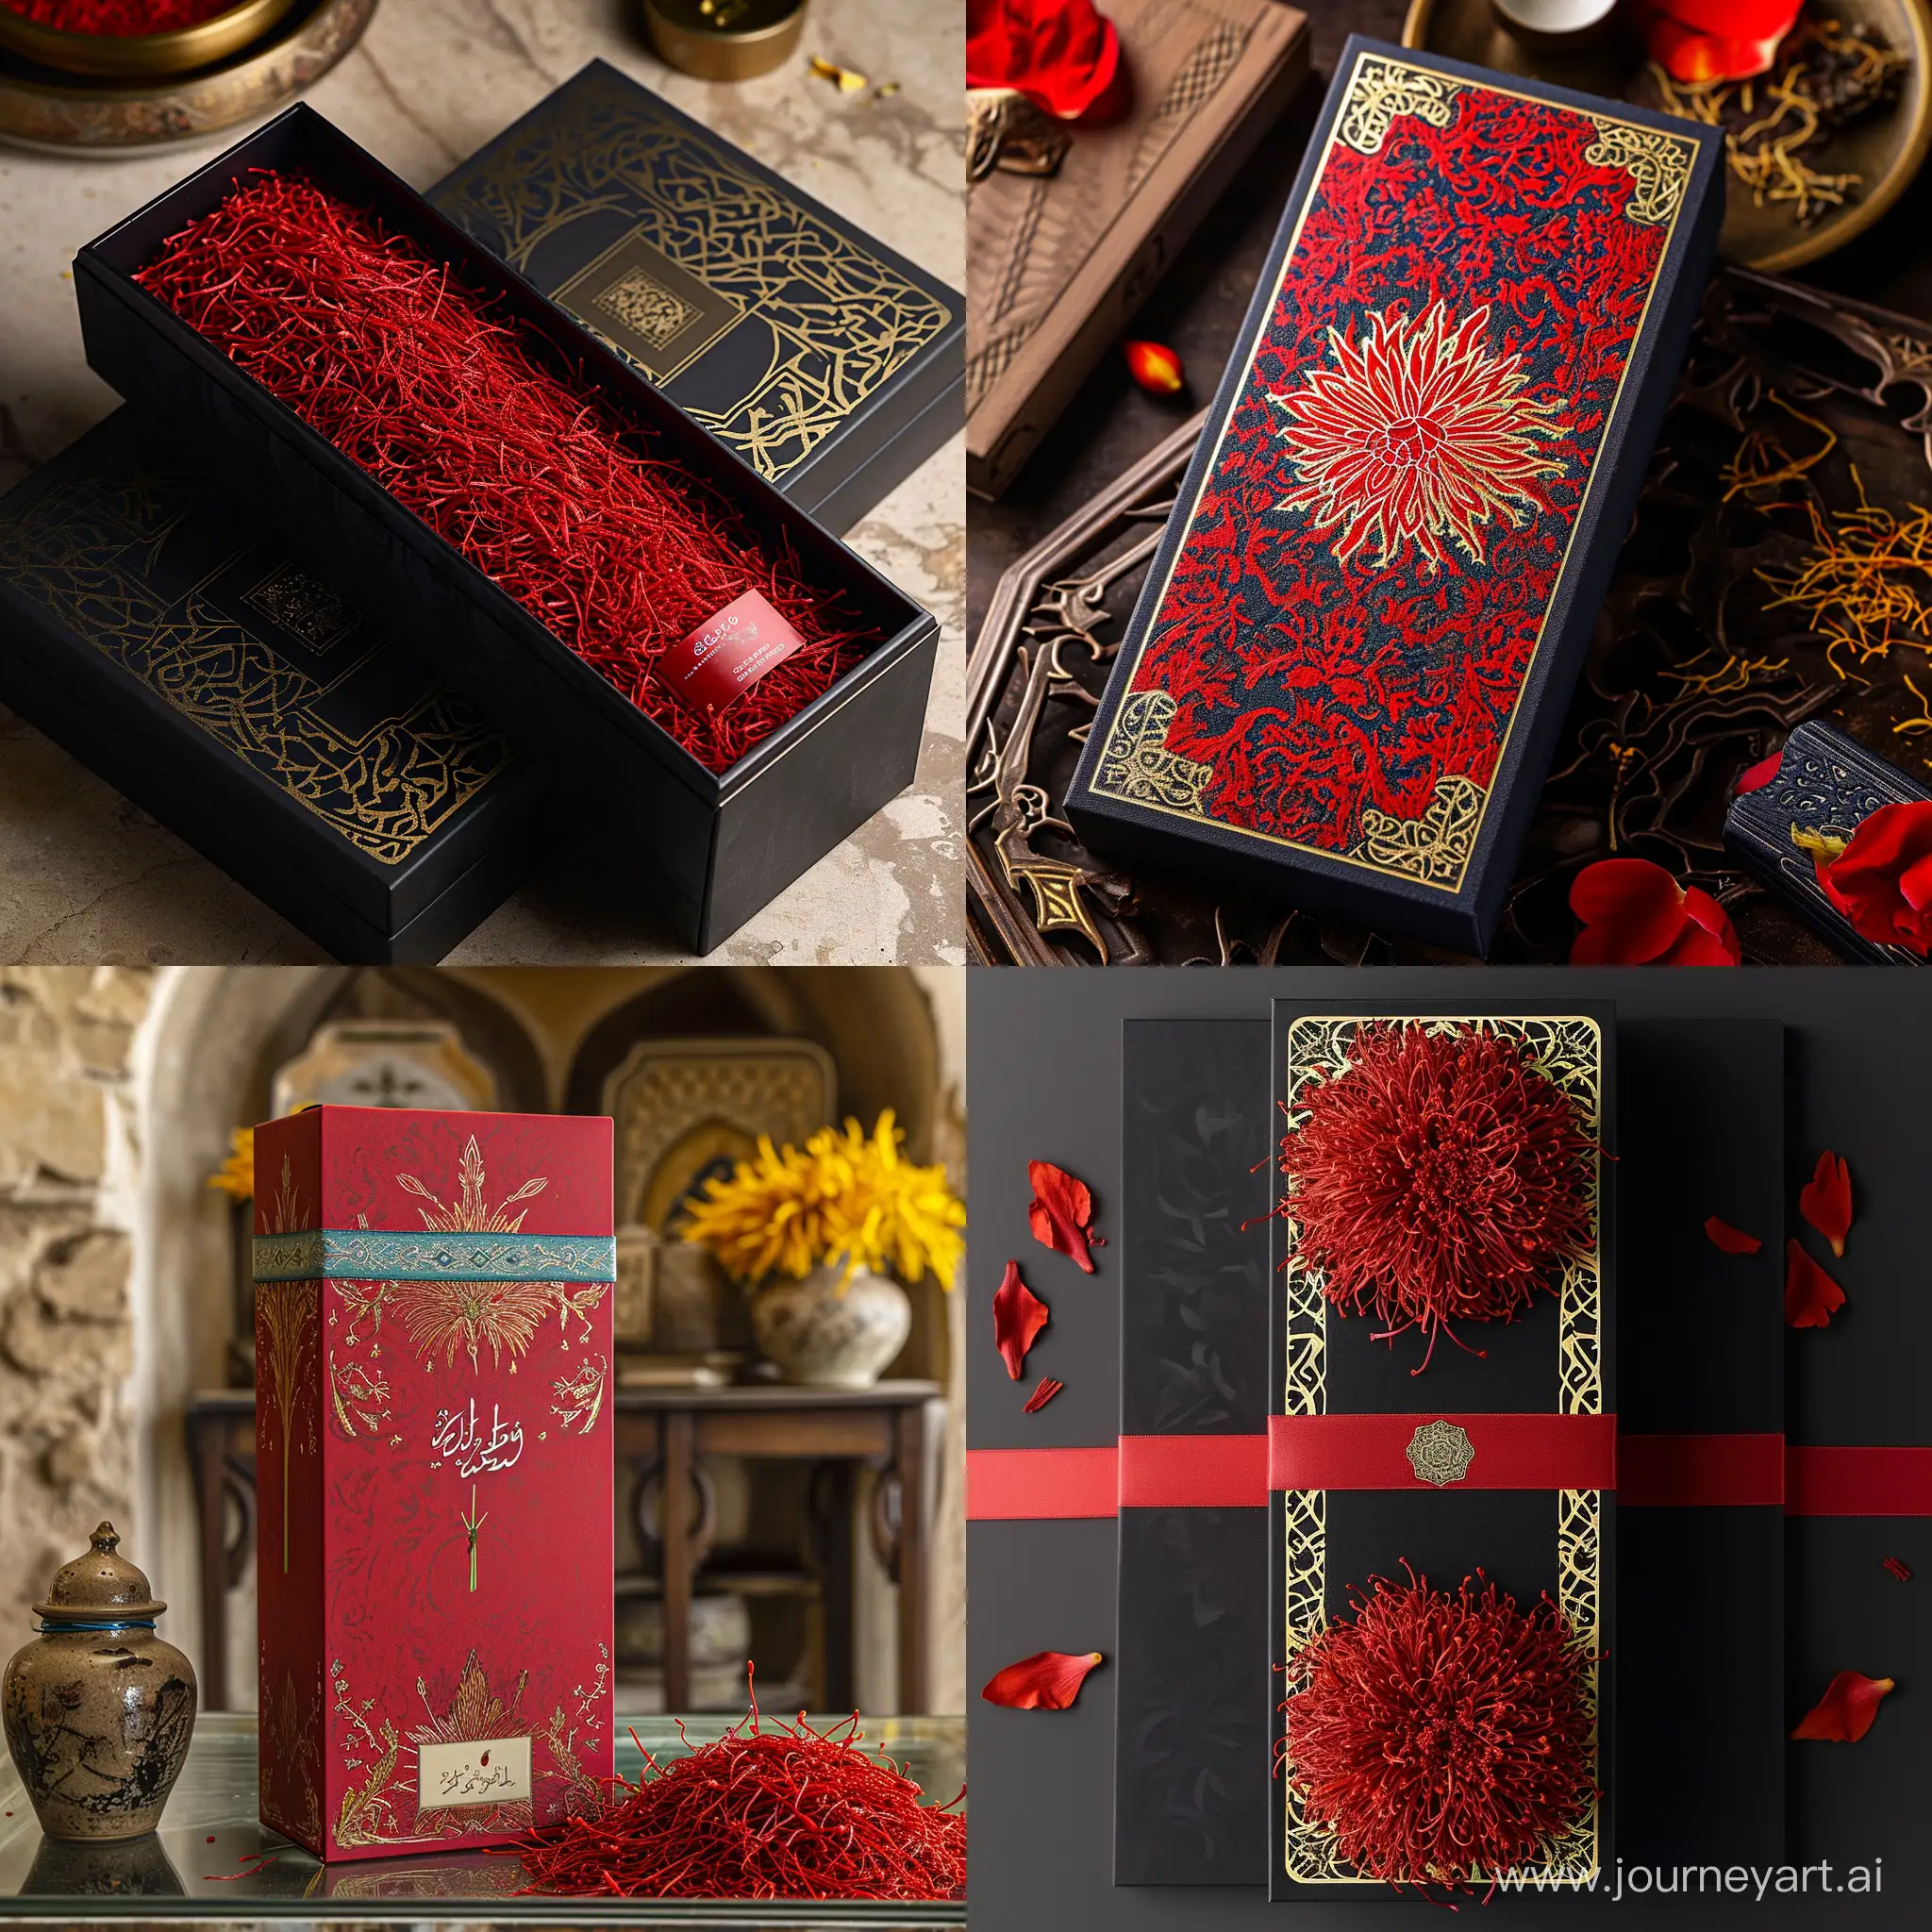 I want the most creative and luxurious packaging that you can design for Iranian saffron